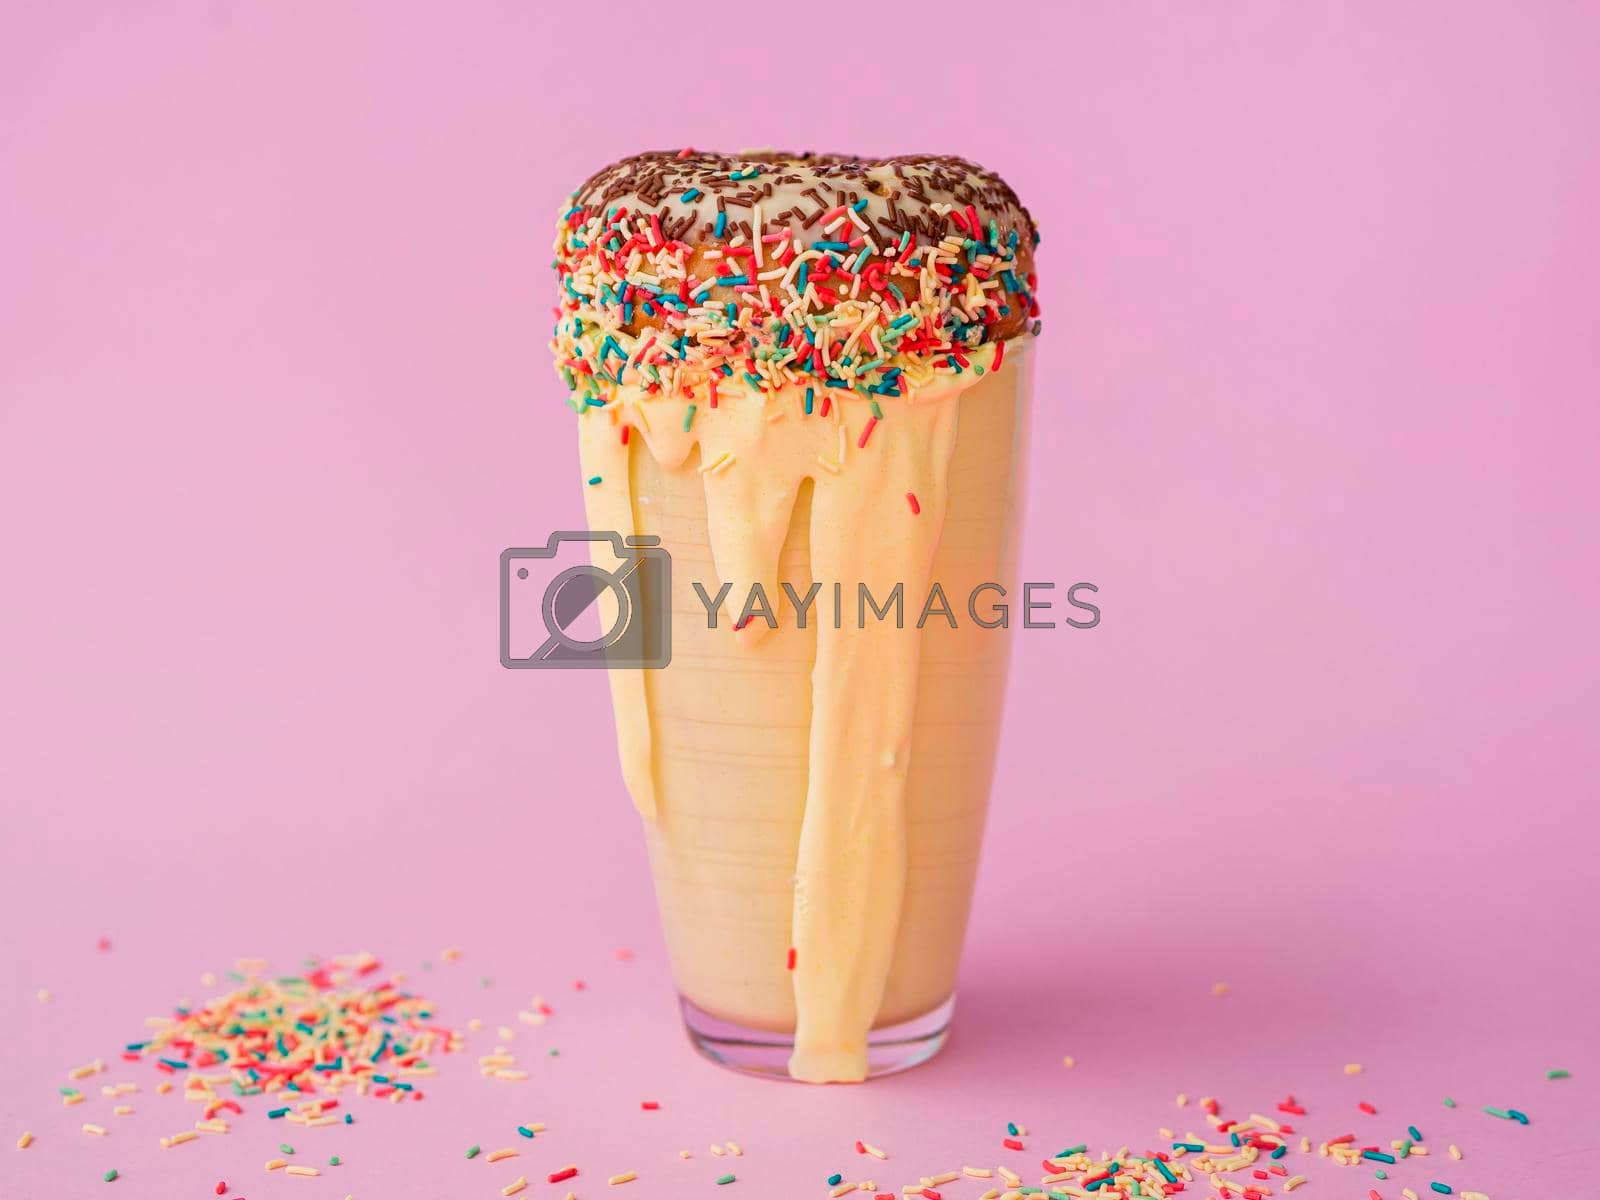 Royalty free image of delicious milkshake with sprinkles. High quality photo by Zahard